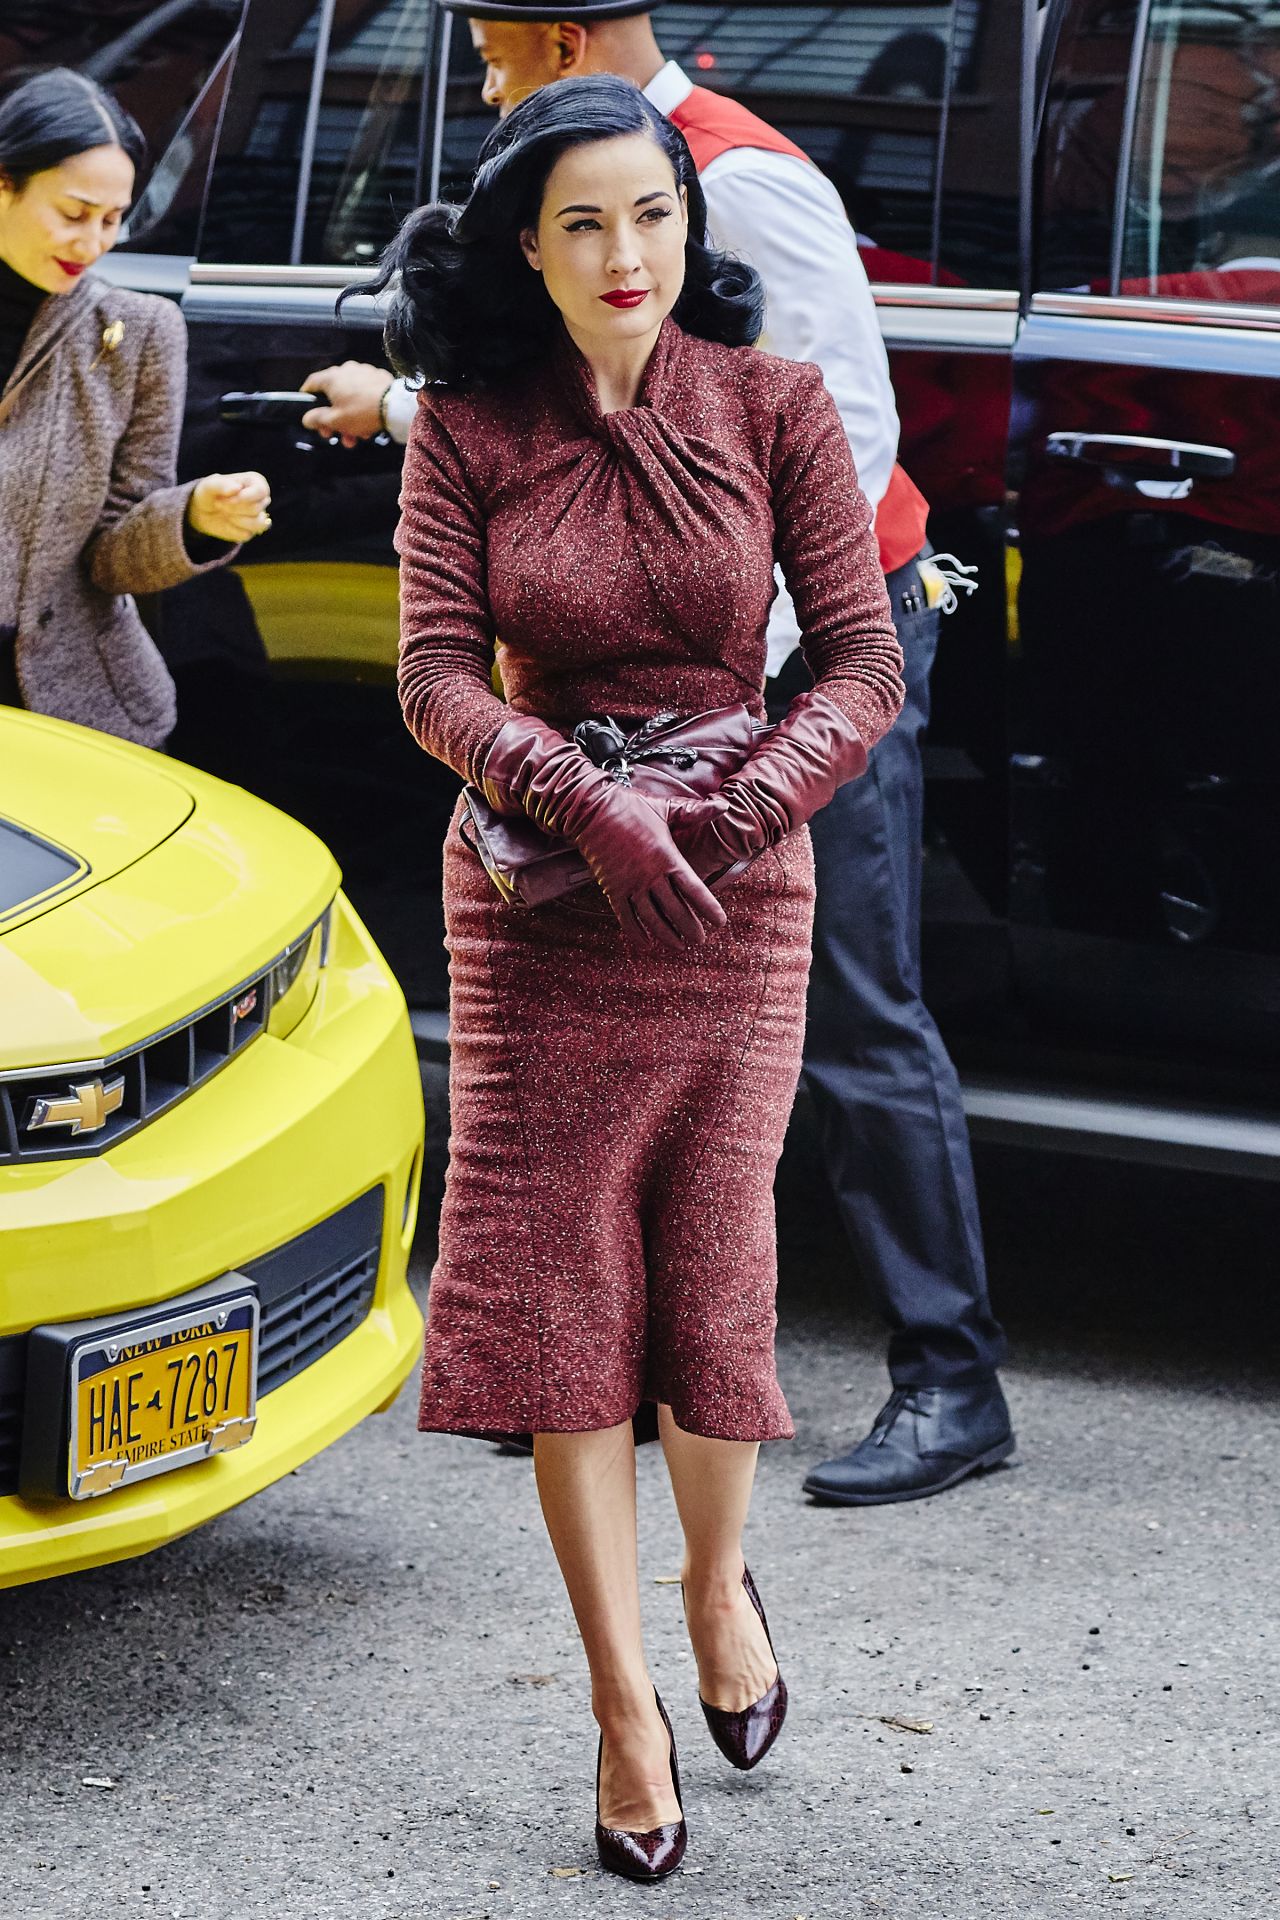 Dita Von Teese in Red Retro Tweed Dress - Arriving at Her Hotel in New ...